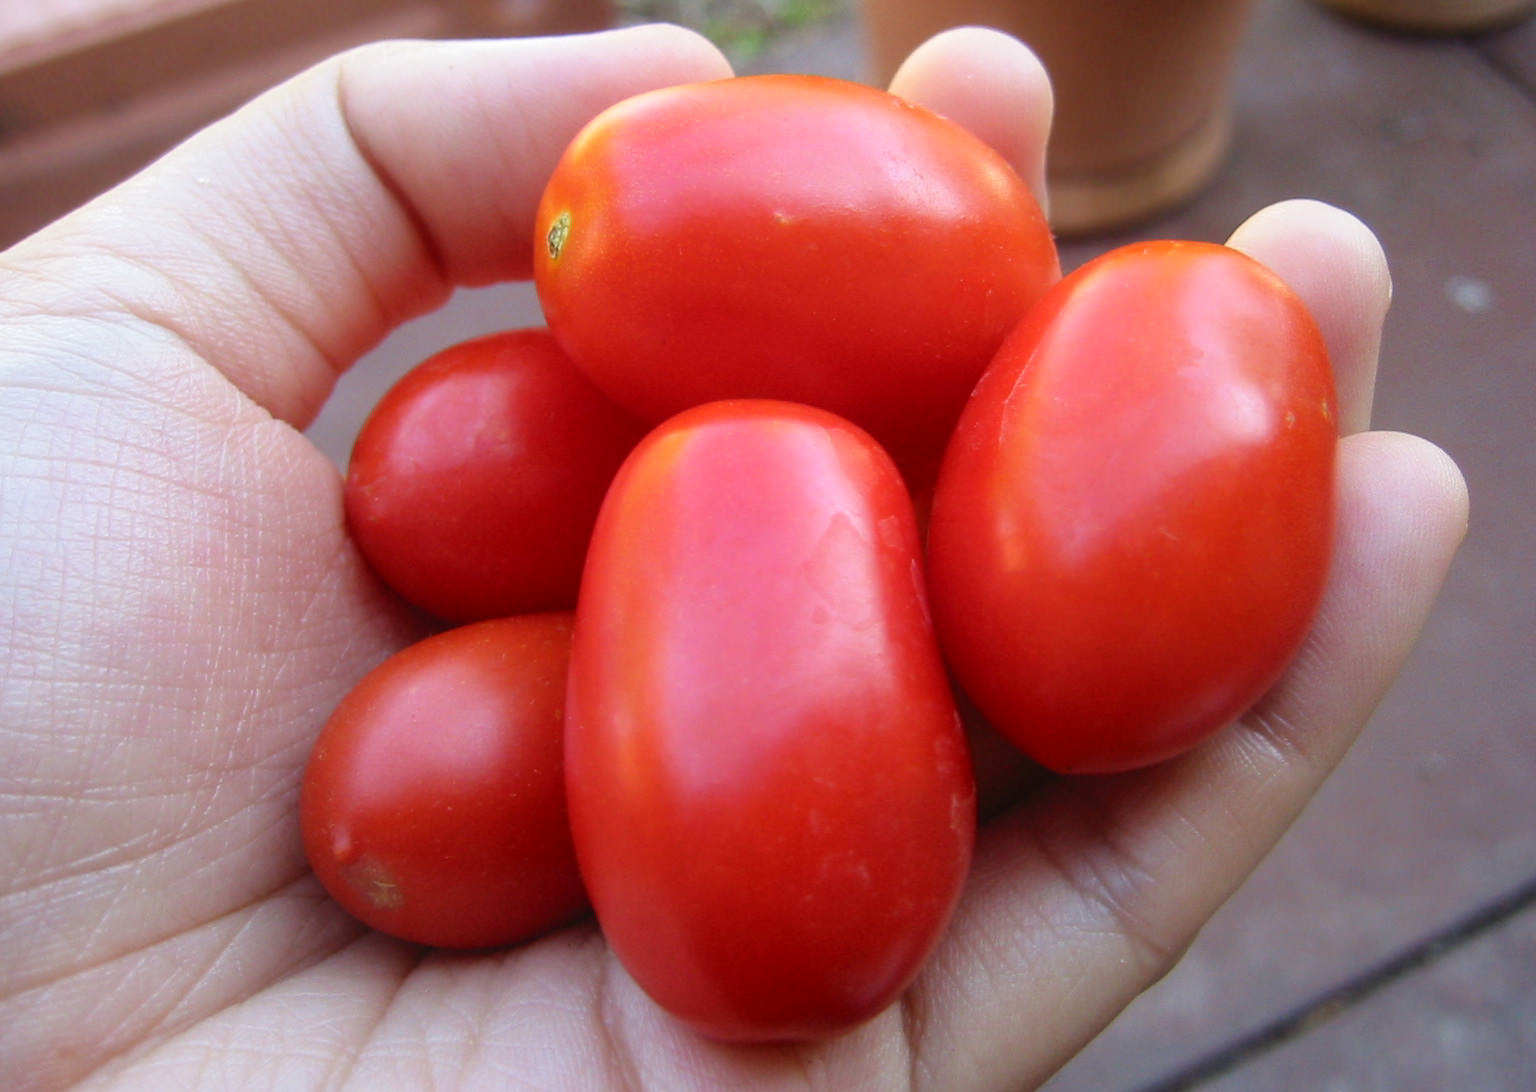 Homegrown tomatoes